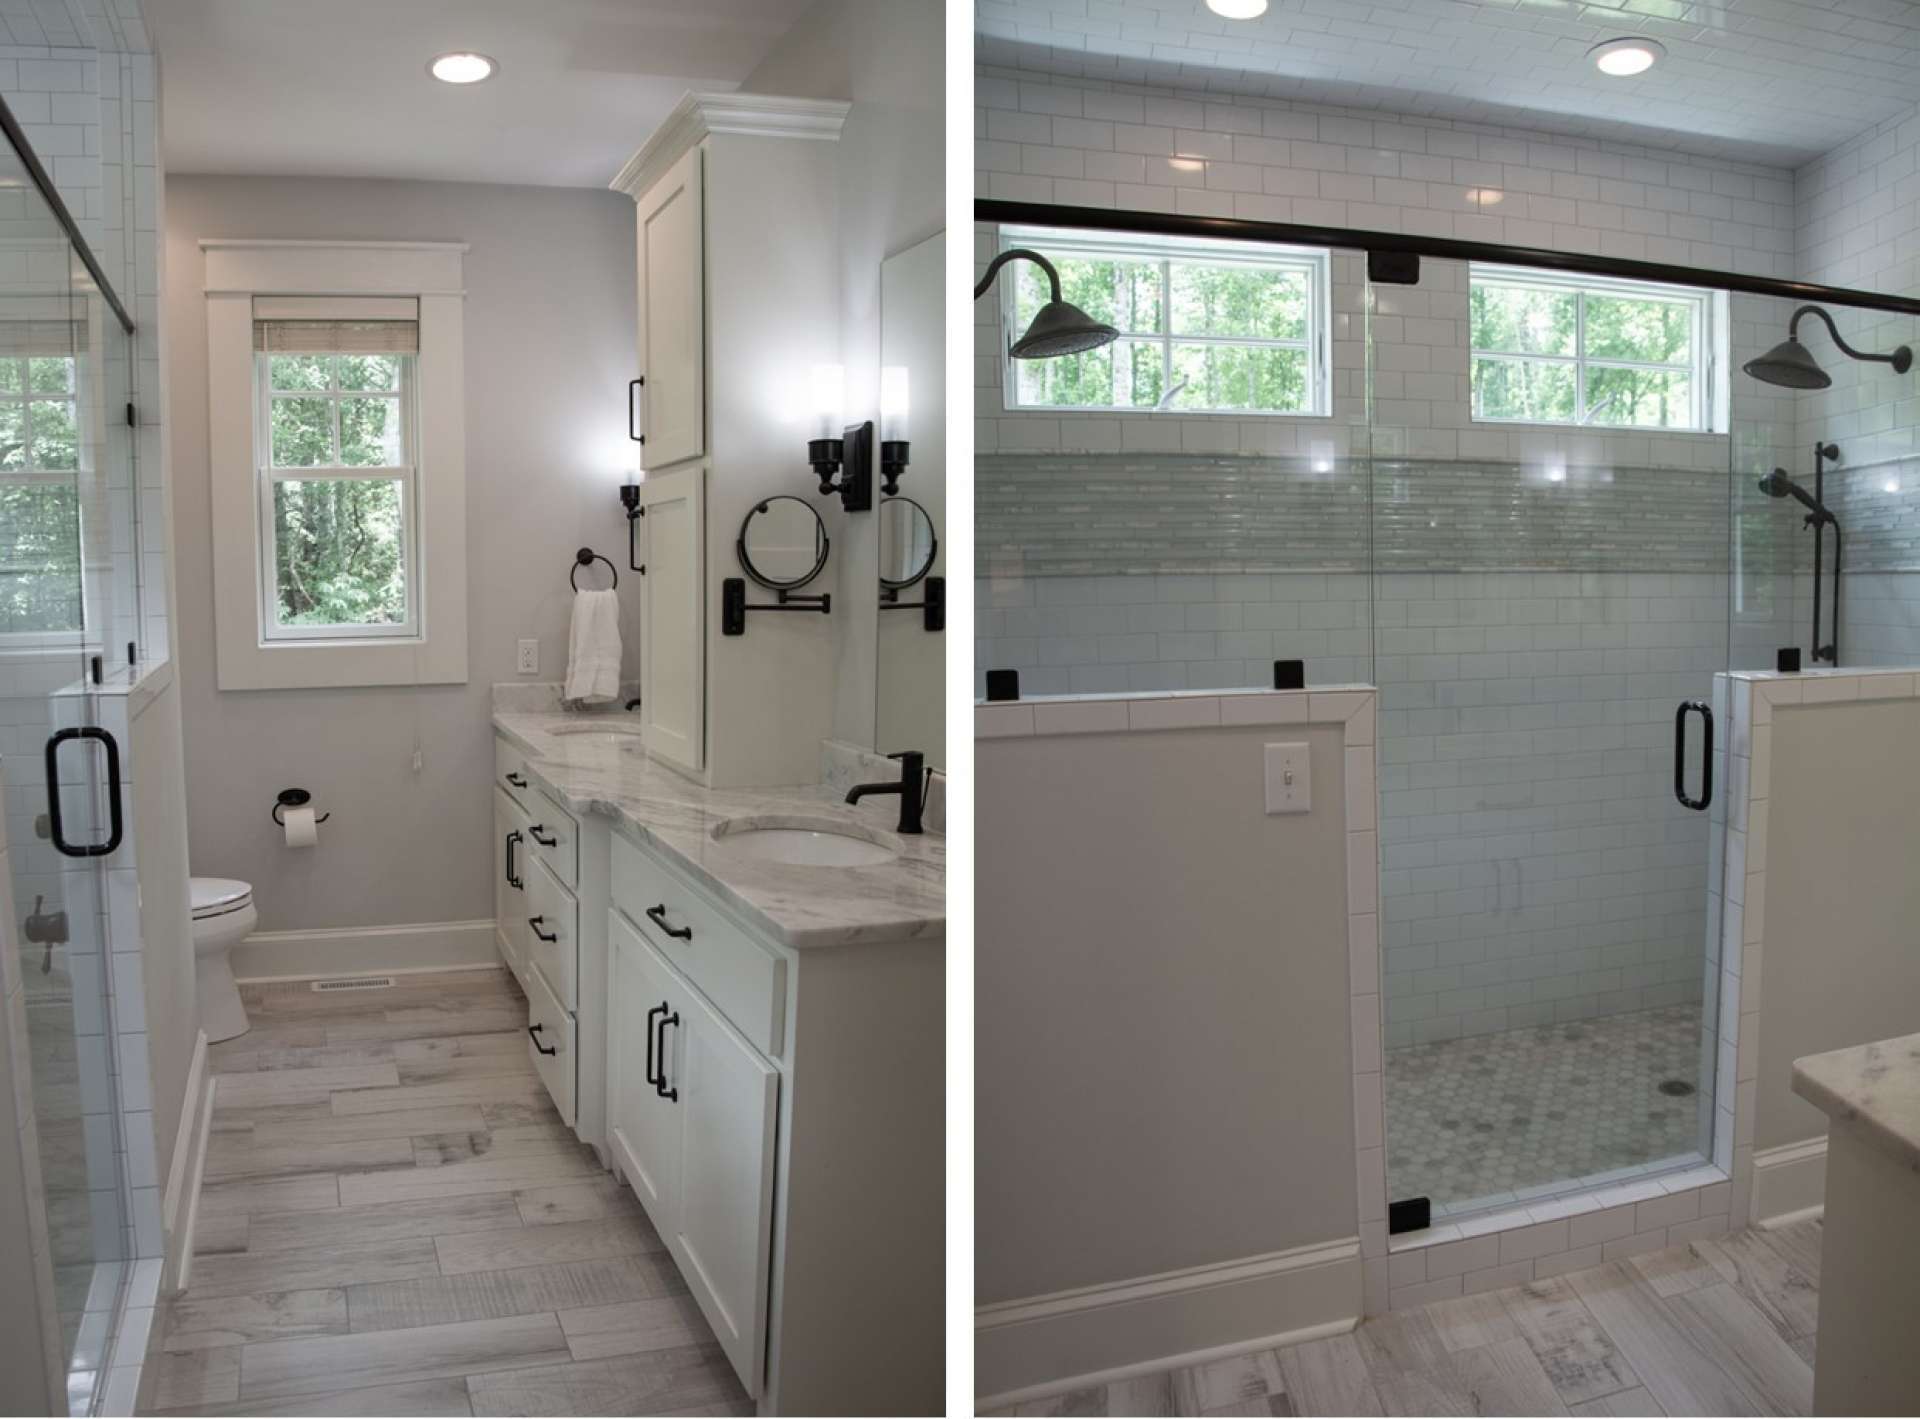 The master bath is nice & bright and offer separate sinks, ample countertop & storage space and a generous size tile shower with four shower heads.